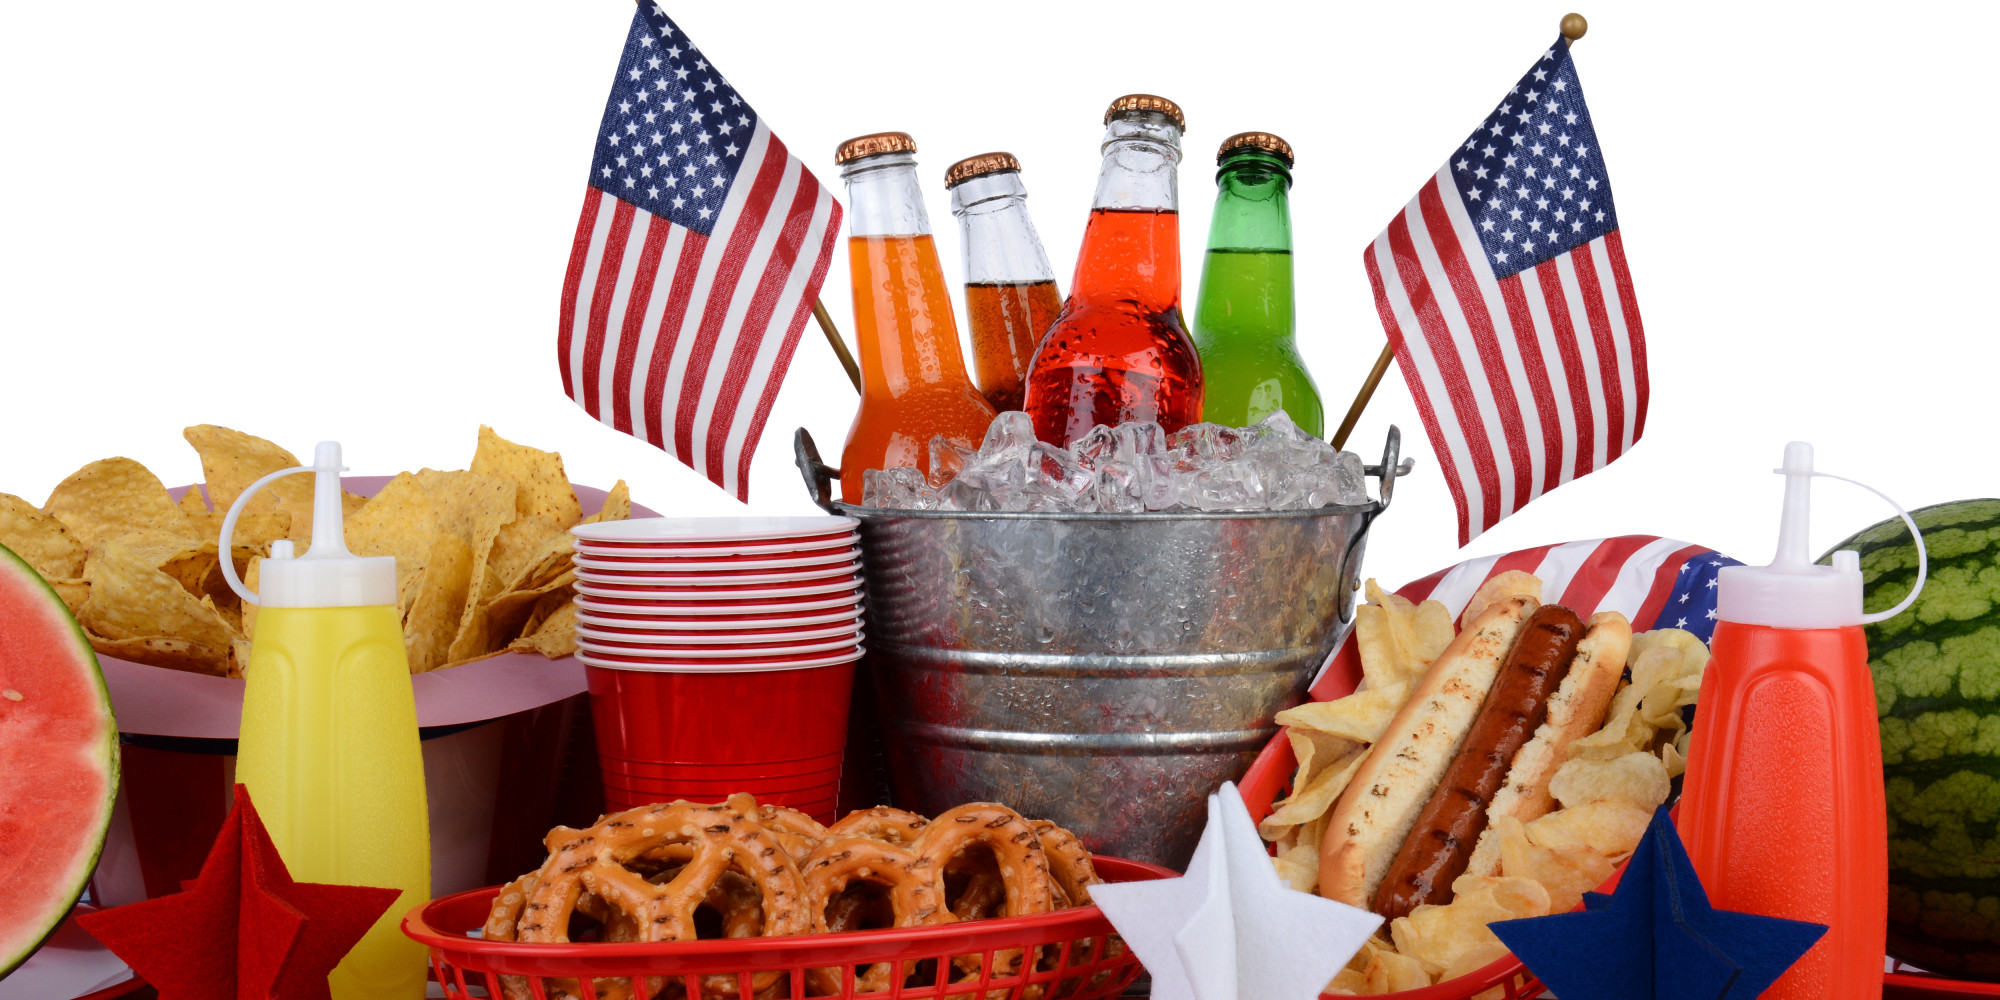 10 Best All-American Dishes for Your July 4th Cookout ...
